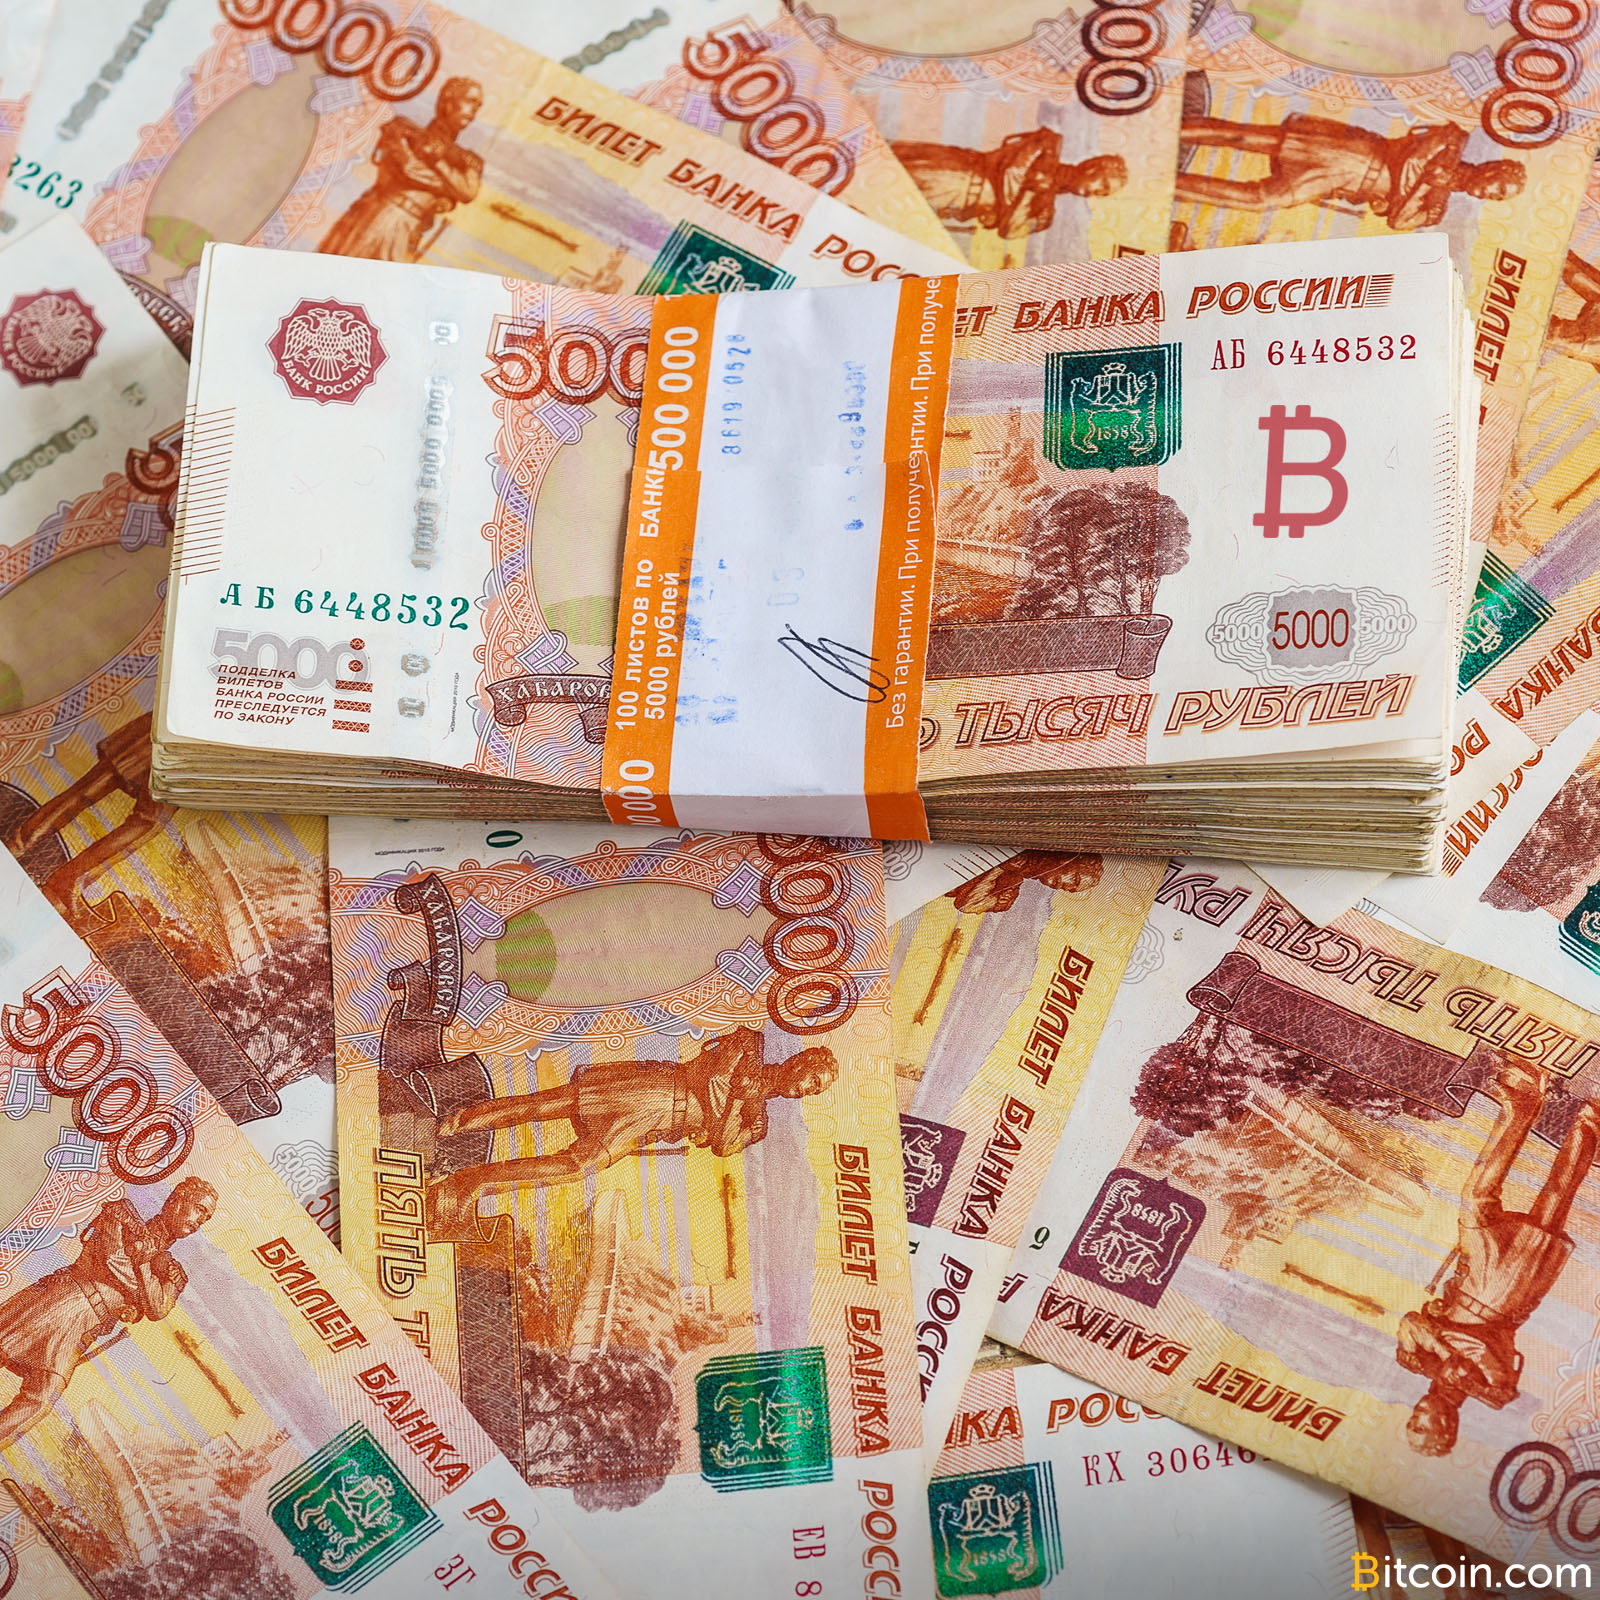 Russian Government Seeks Cryptocurrency Researchers, Will Pay 2.5 Million Rubles